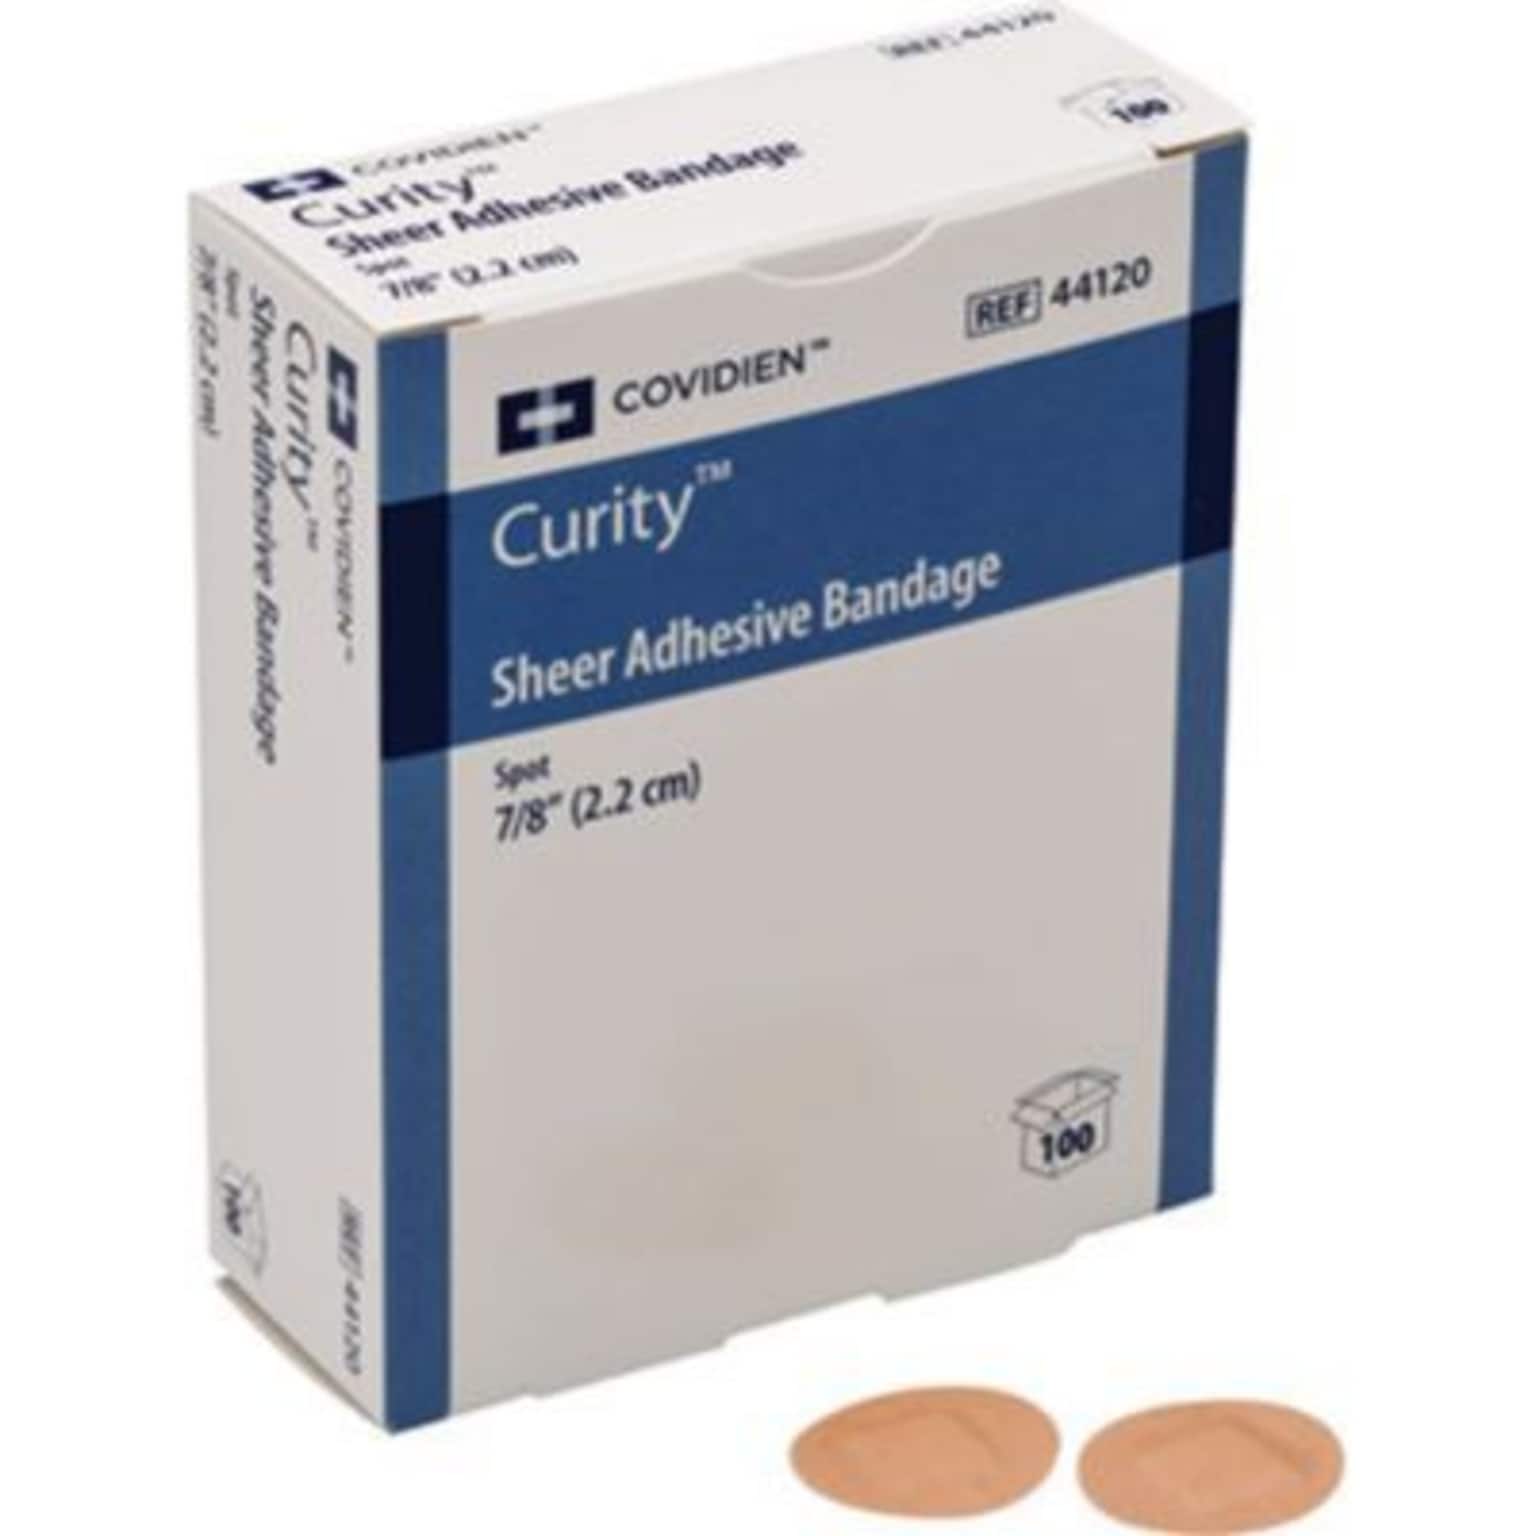 Curity 7/8” Round Spot Sheer Plastic Adhesive Bandages, 100/Box (KCFB0193LF)